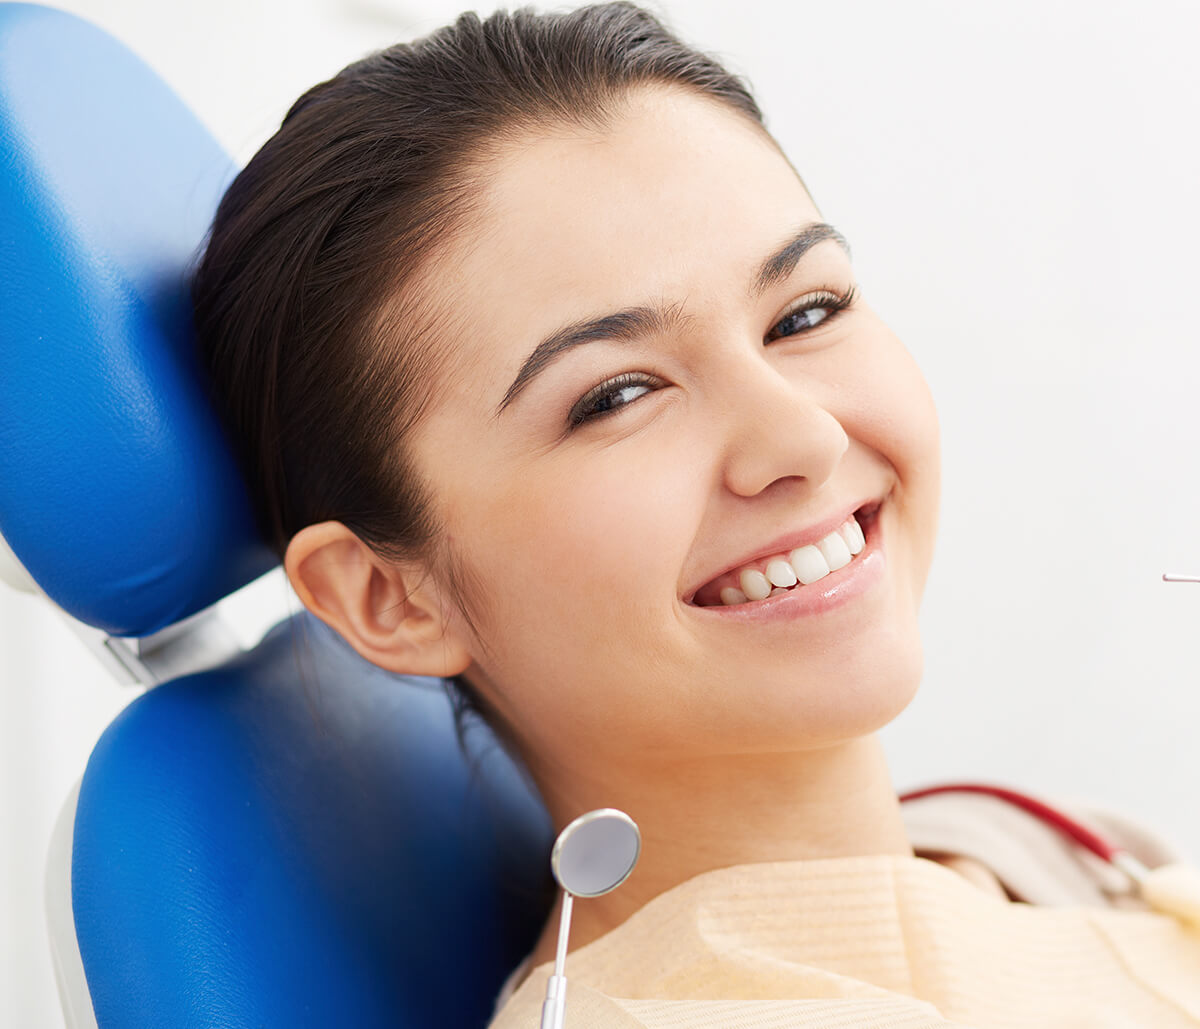 Tooth Pulp Infection Treatment in Fort Worth TX Area